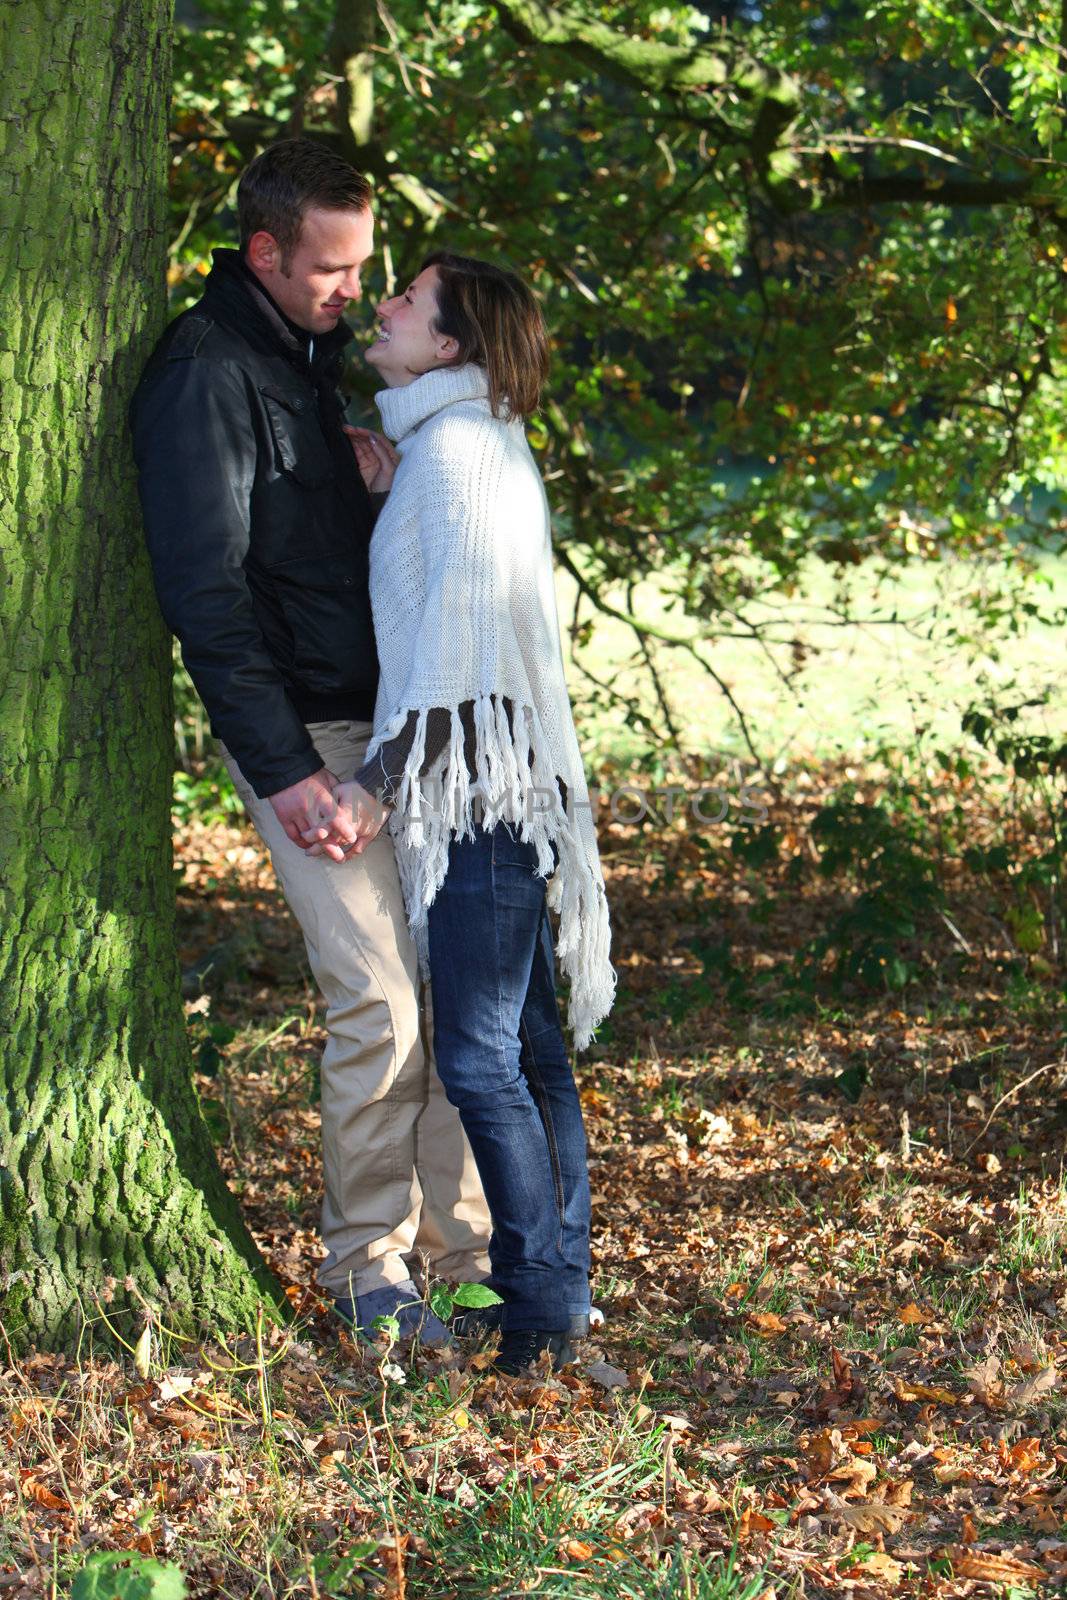 Loving young couple standing under a large tree in the forest holding hands and looking into each others eyes poised to kiss